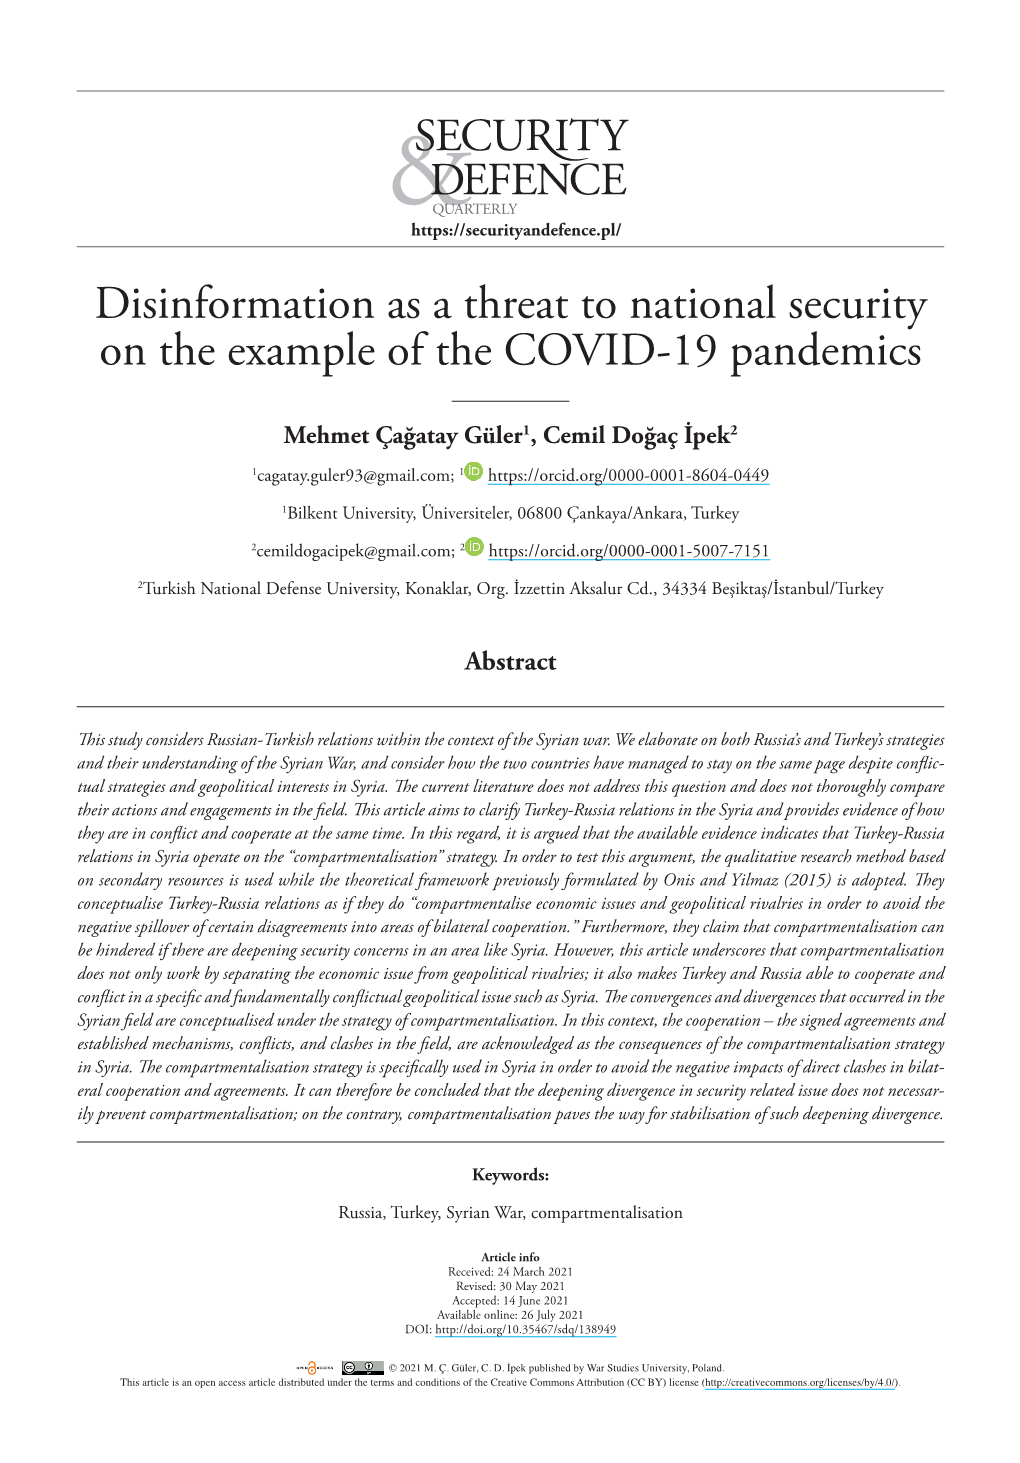 Disinformation As a Threat to National Security on the Example of the COVID-19 Pandemics